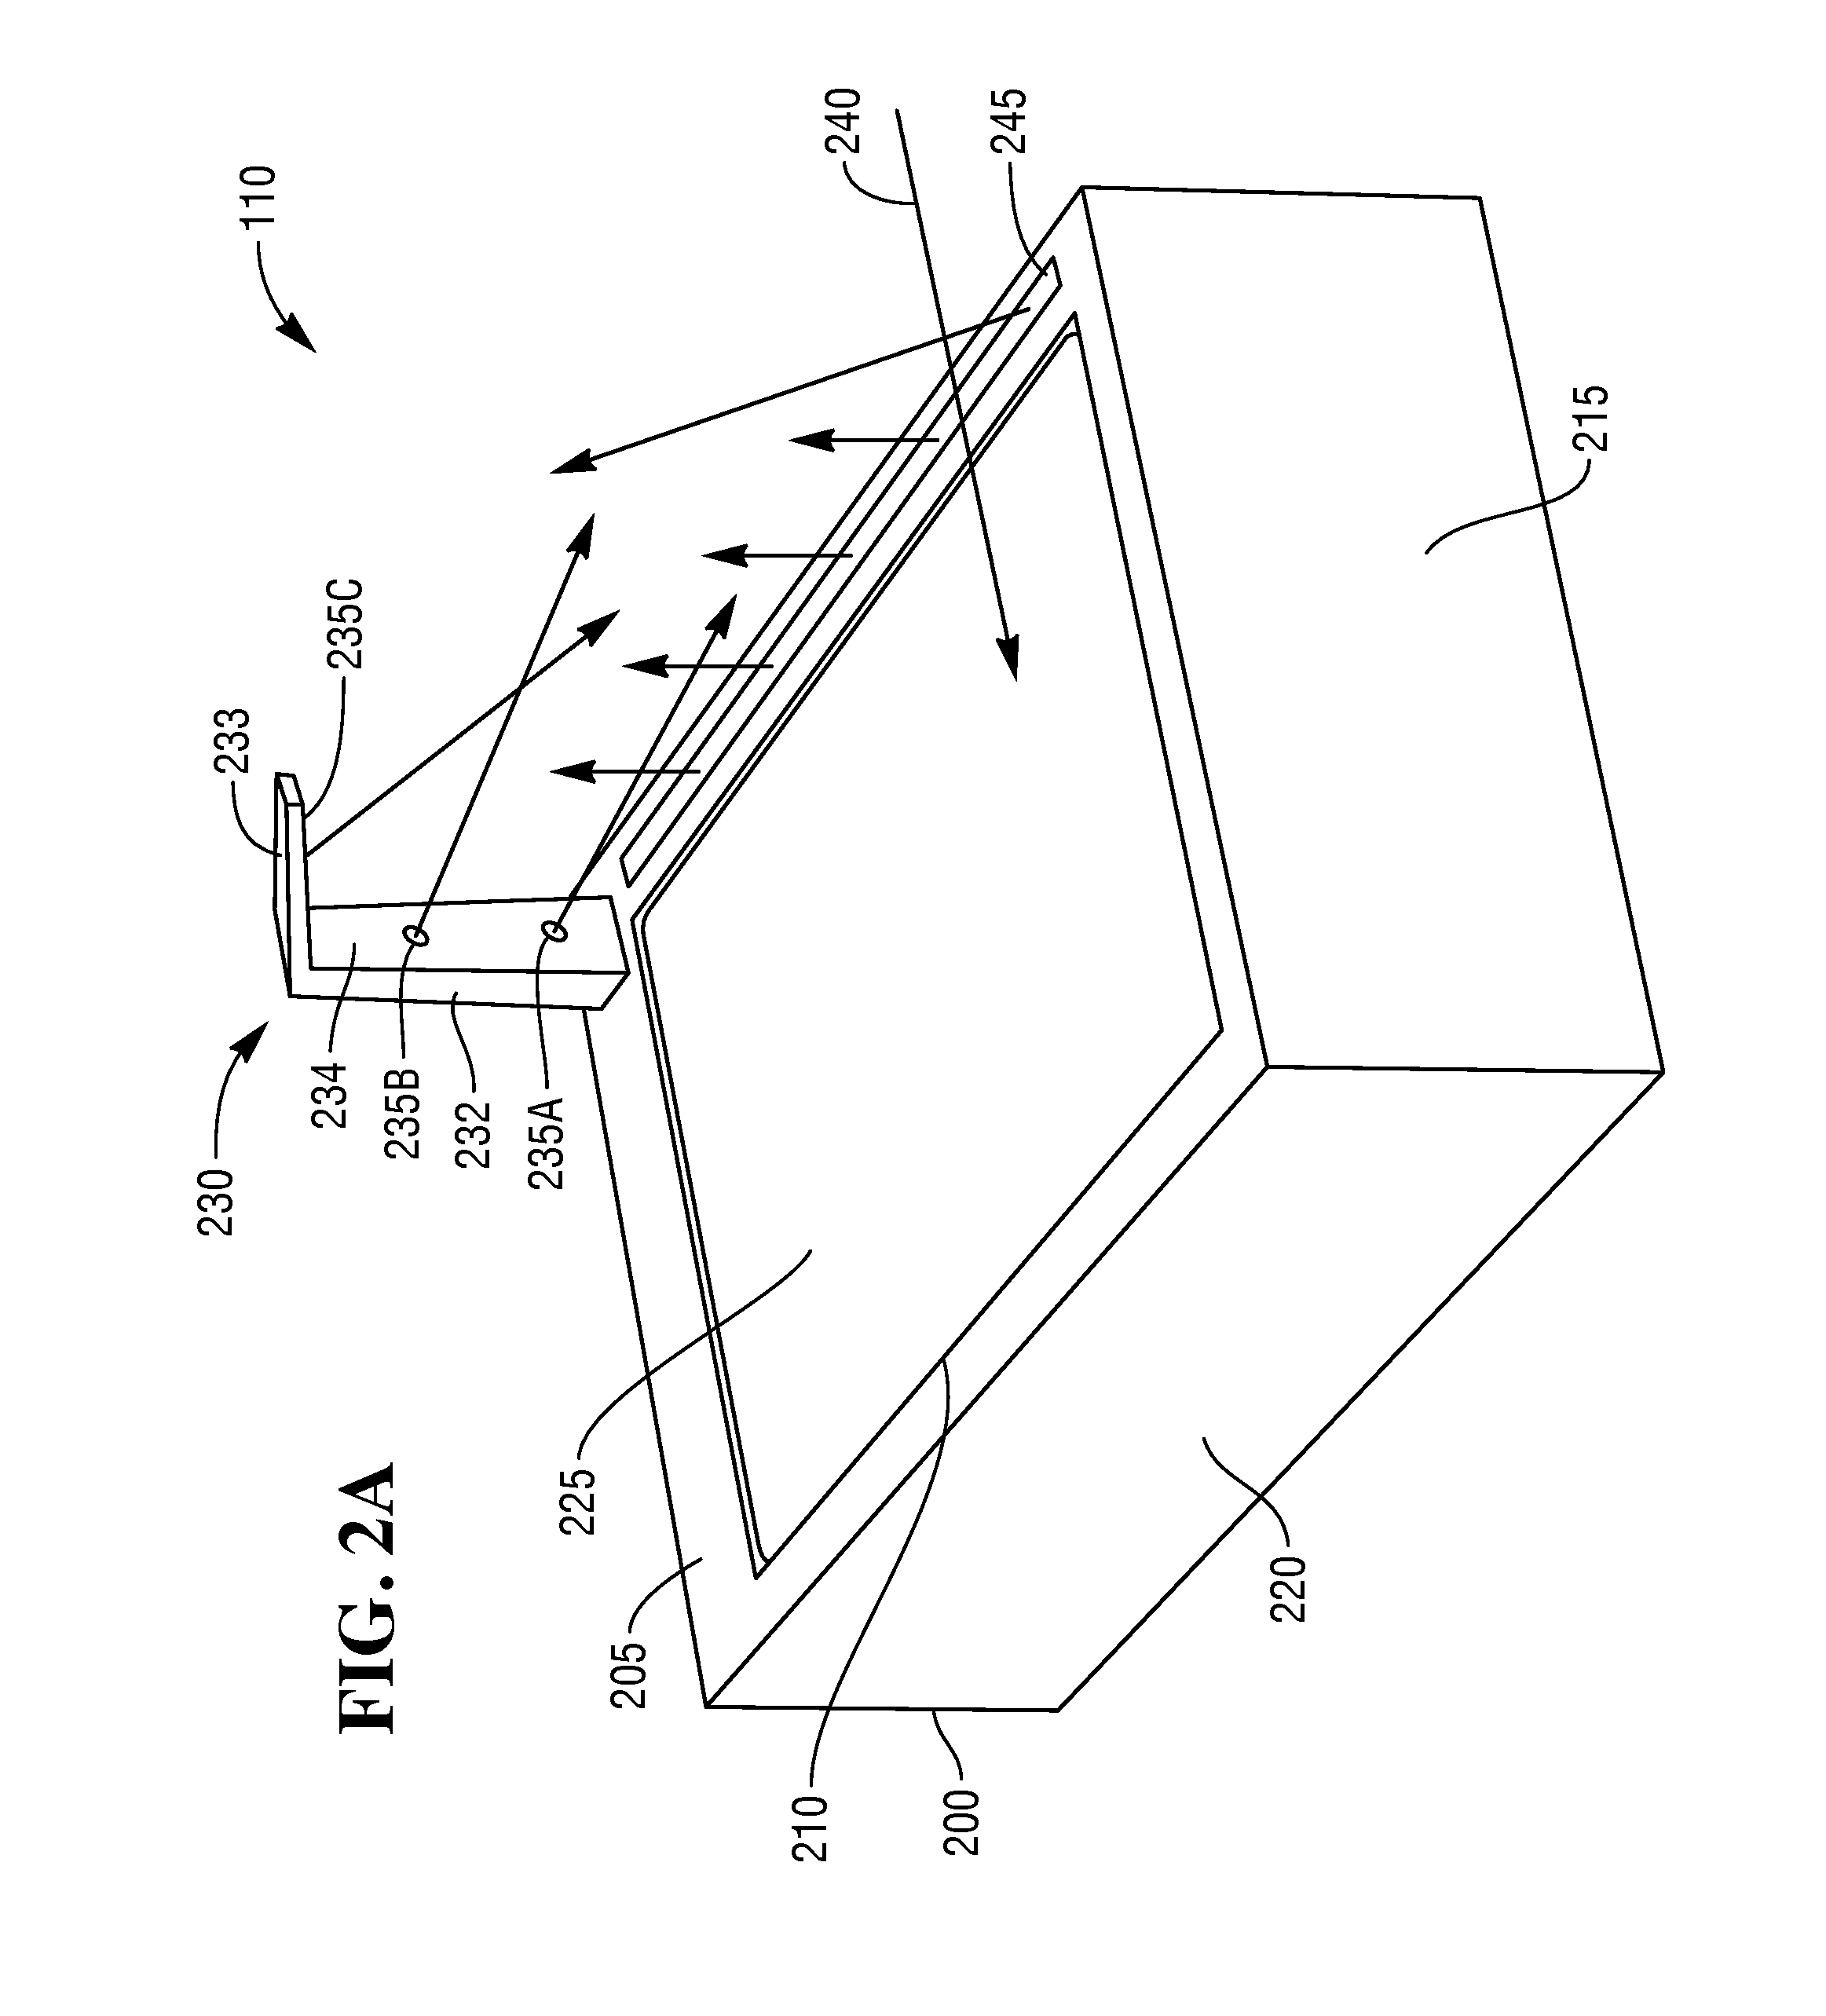 Method, Apparatus and System for Scanning an Optical Code